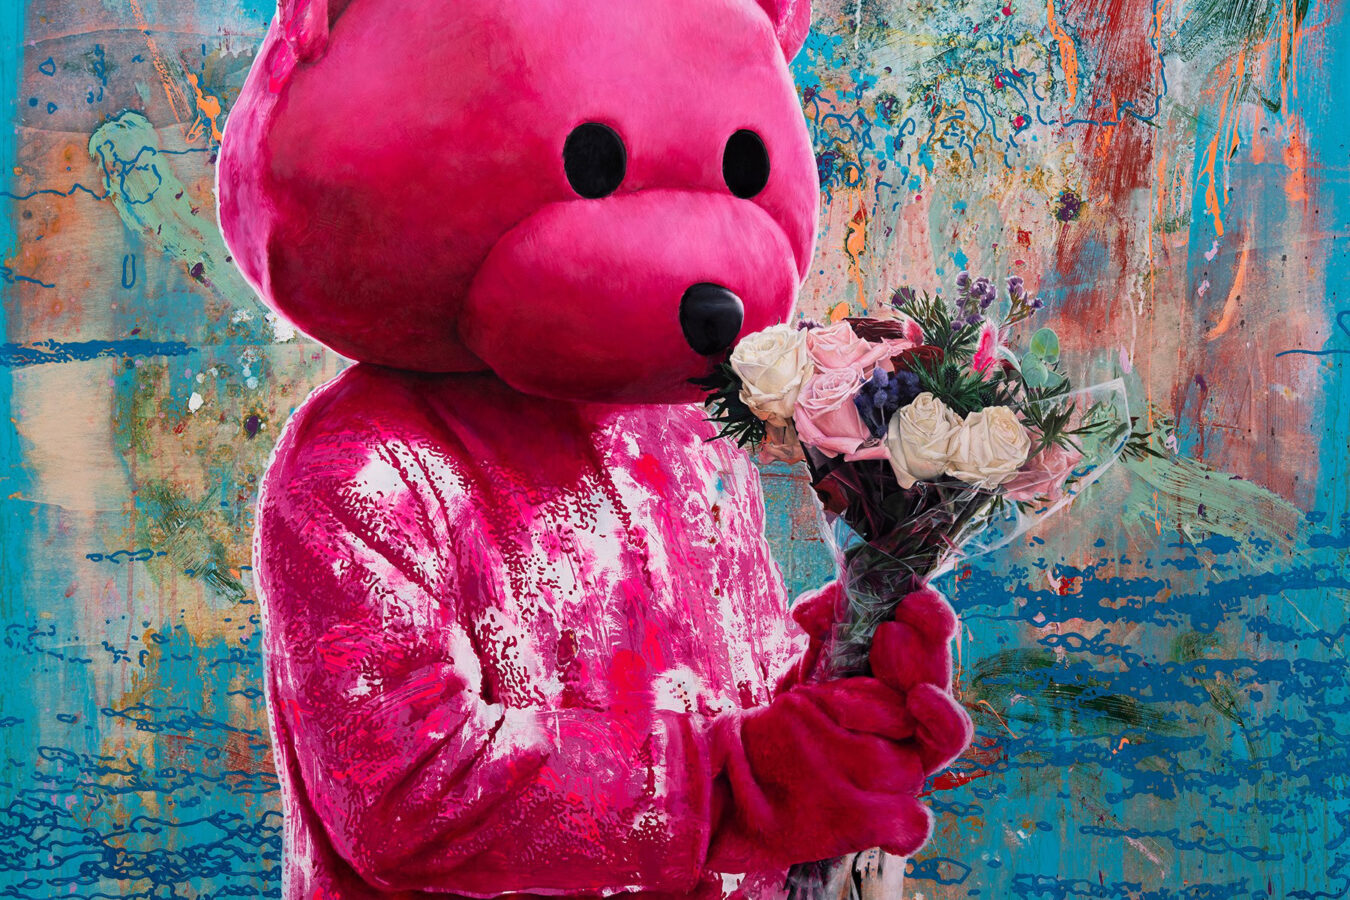 painting of person in a pink bear costume  holding a boquet of flowers in front of a blue painterly background